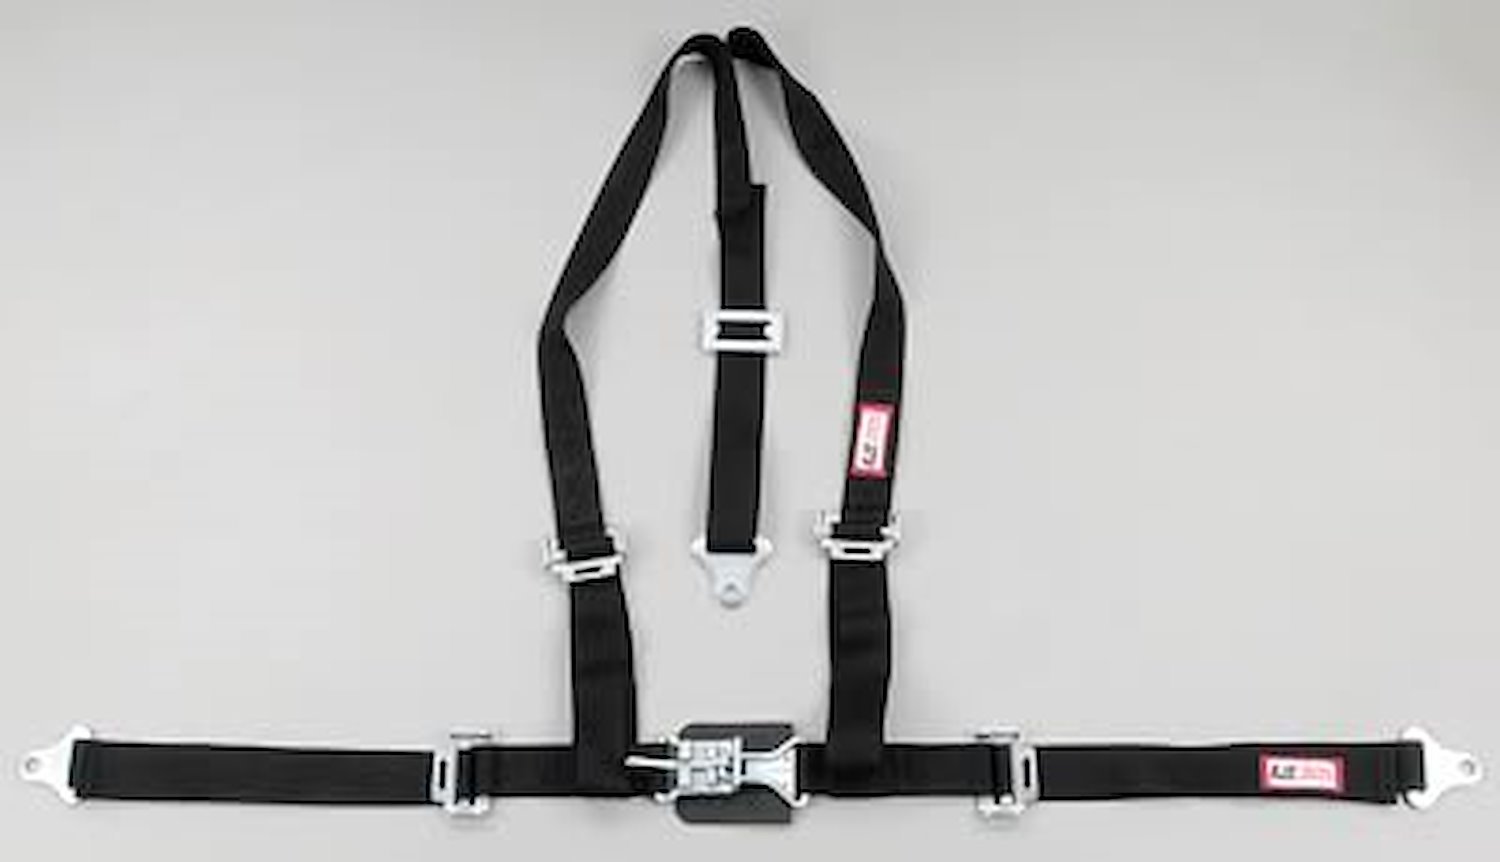 NON-SFI L&L HARNESS 2 PULL UP Lap Belt SNAP SEWN IN 2 S.H. Y FLOOR Mount w/STERNUM STRAP WRAP/SNAP BLUE